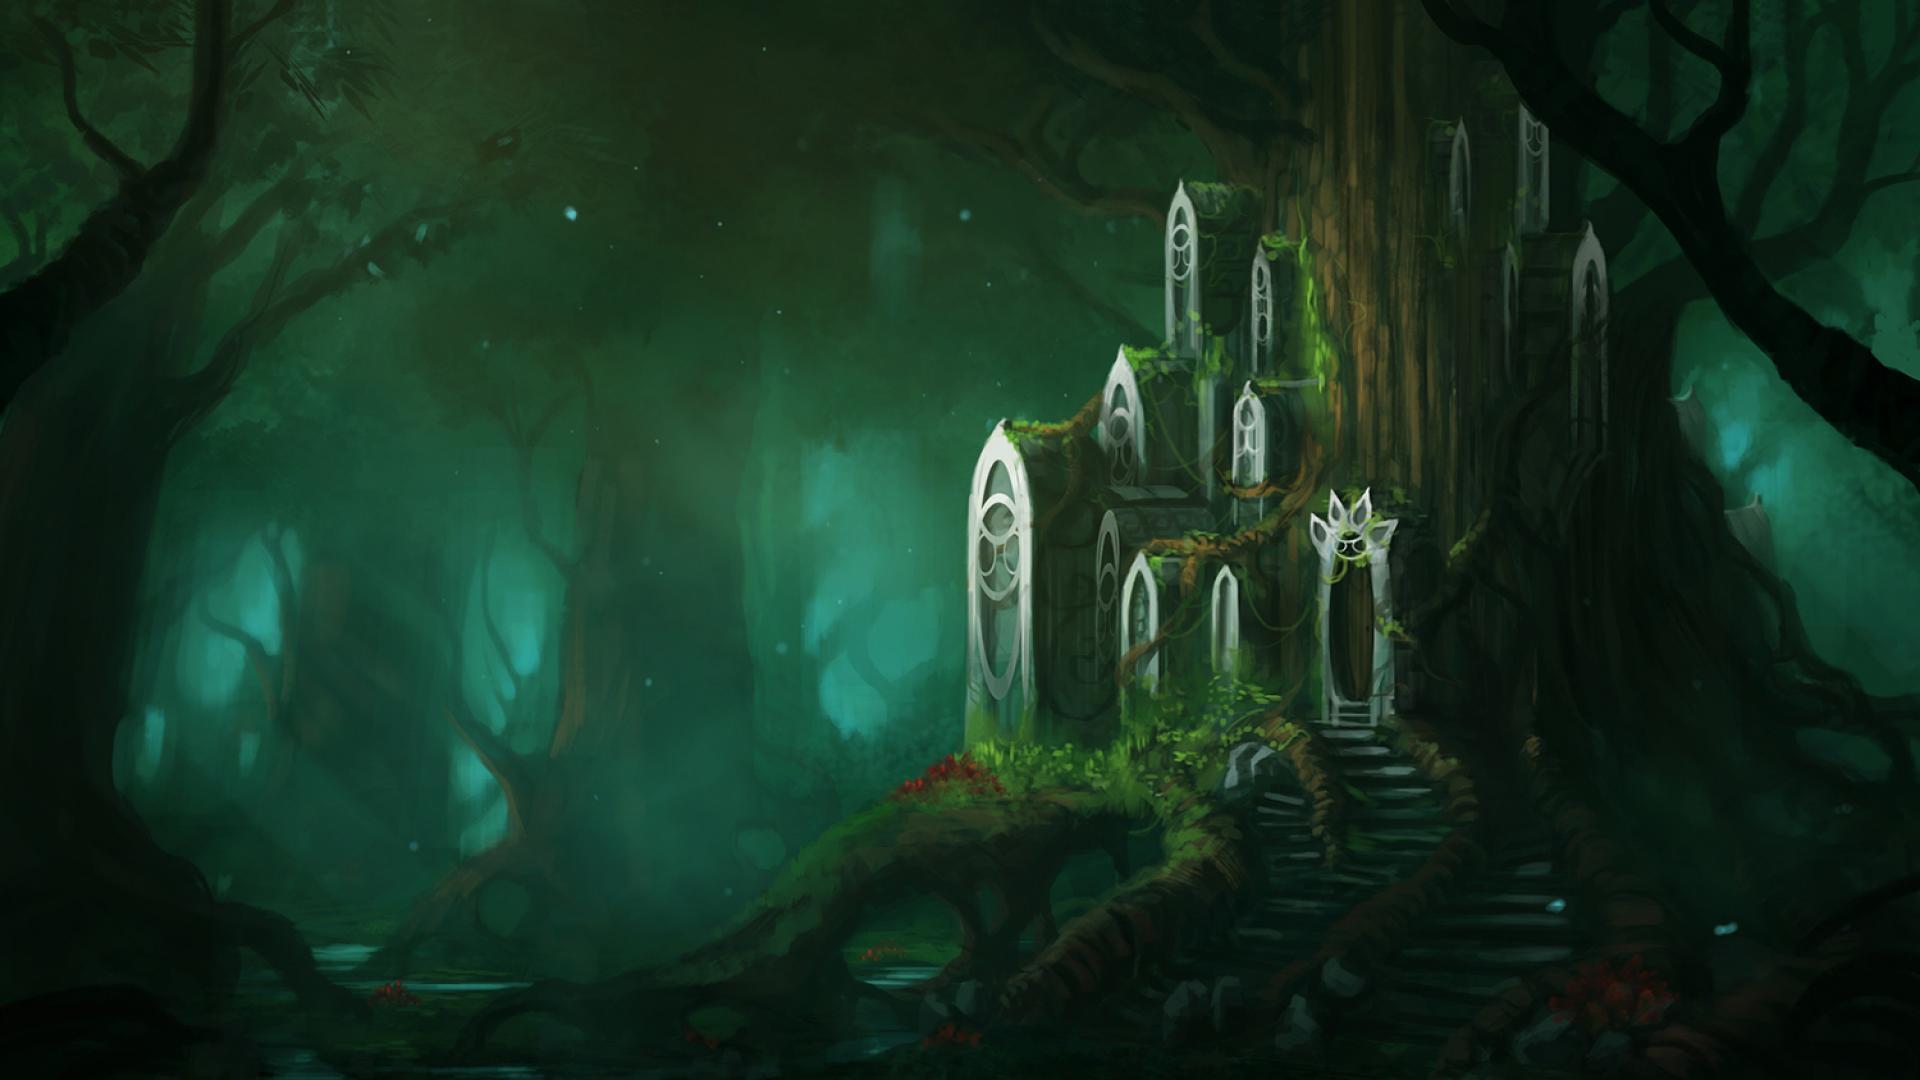 Fantasy Forest Wallpaper Images #lbbq Mbuh.xyz